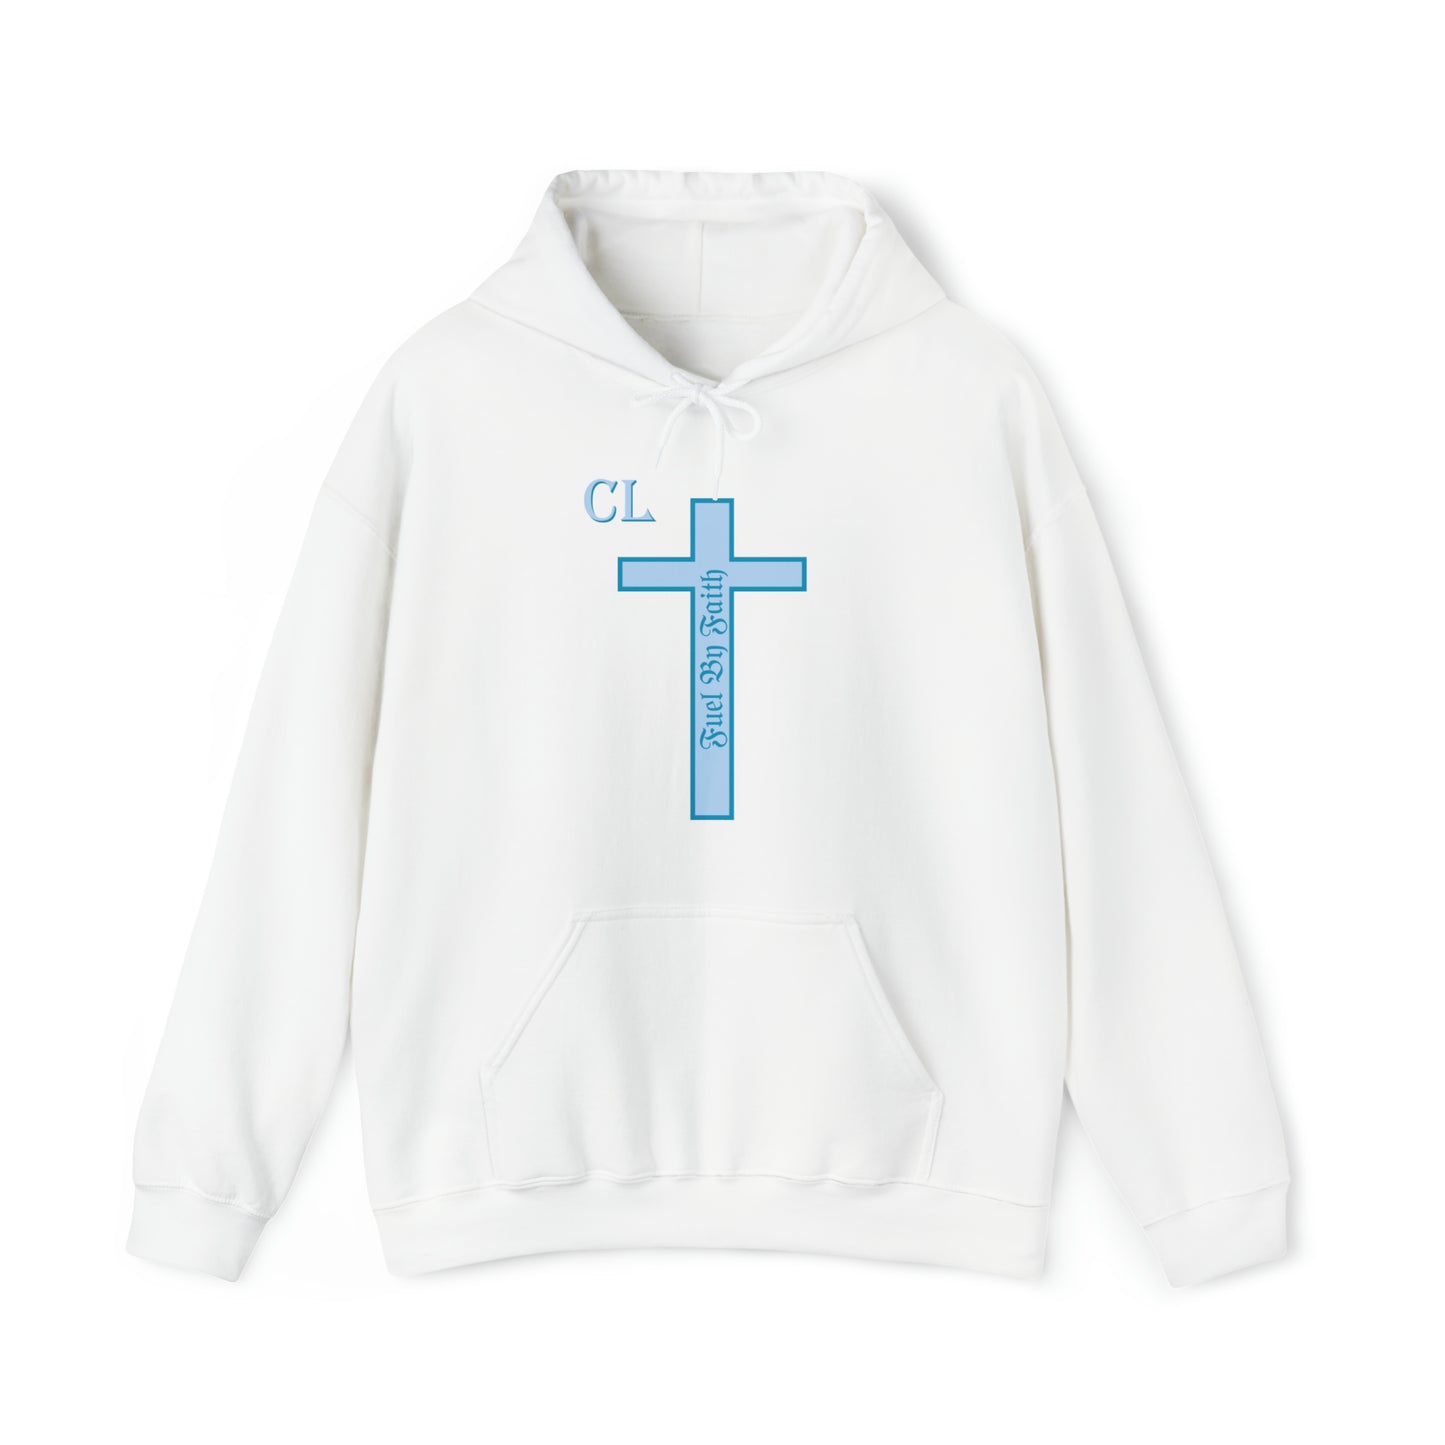 Charles Lampten: Fuel By Faith Hoodie